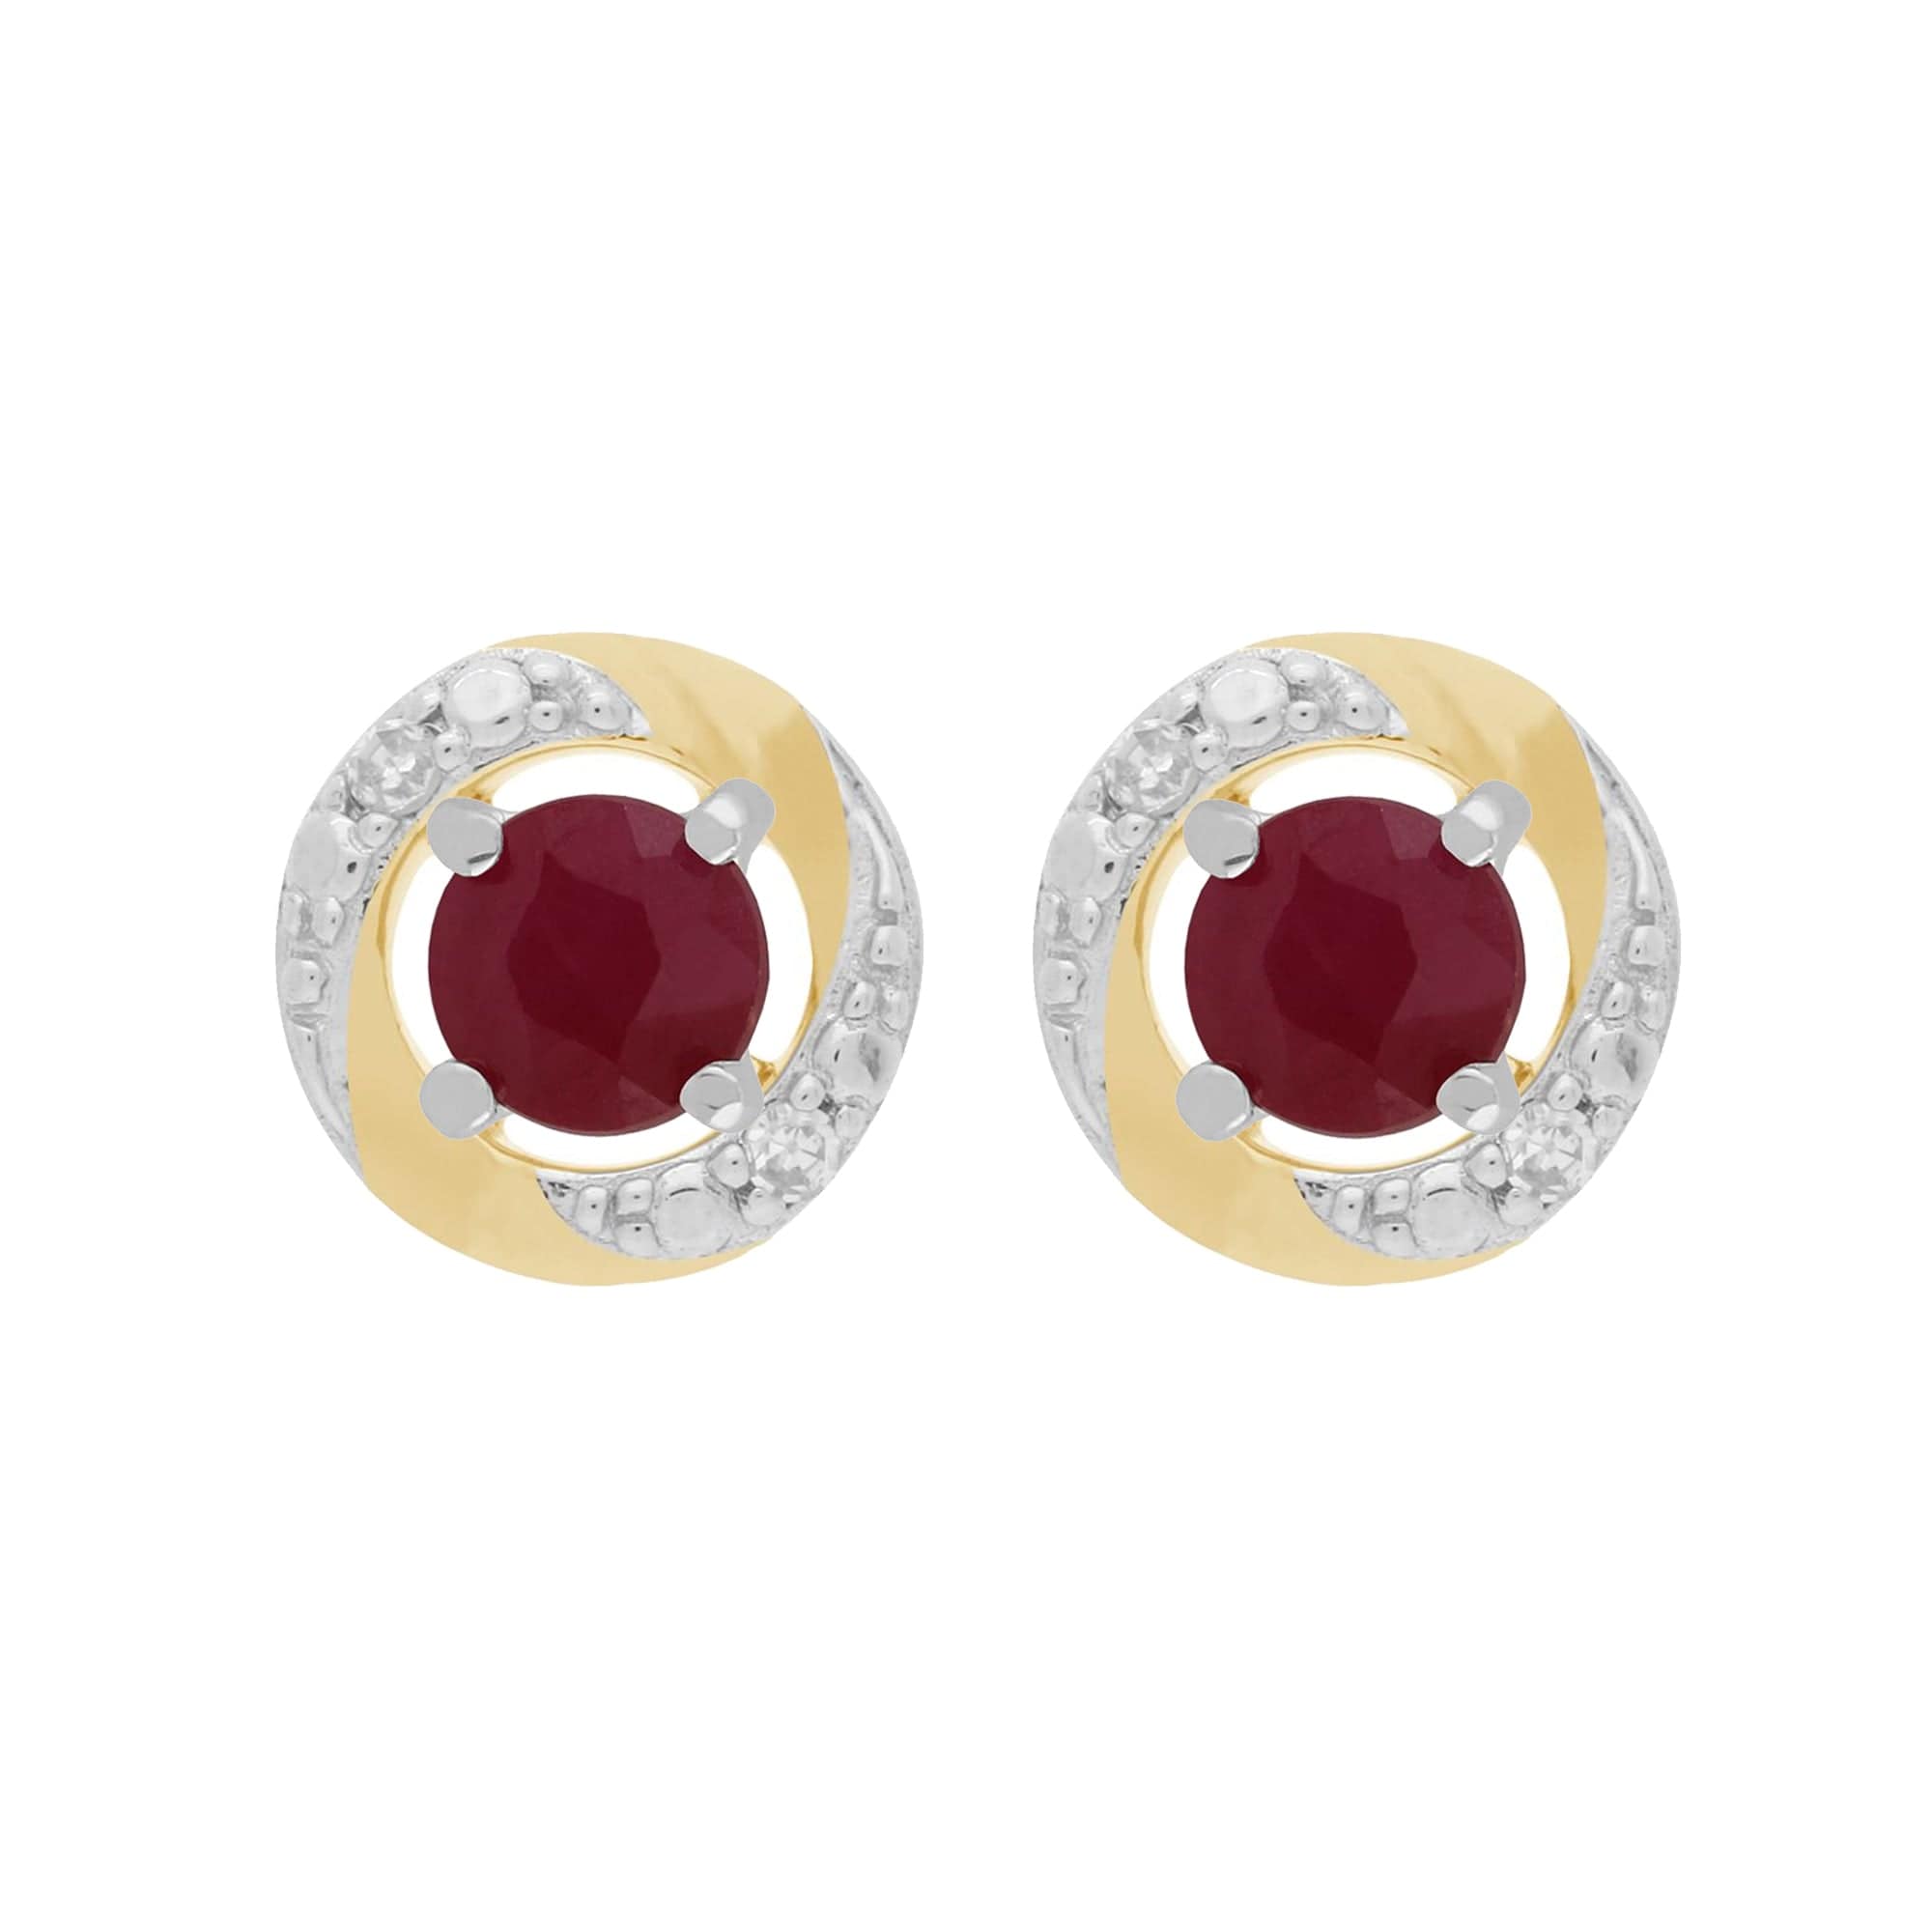 11622-191E0374019 9ct White Gold Ruby Stud Earrings with Detachable Diamond Halo Ear Jacket in 9ct Yellow Gold 1